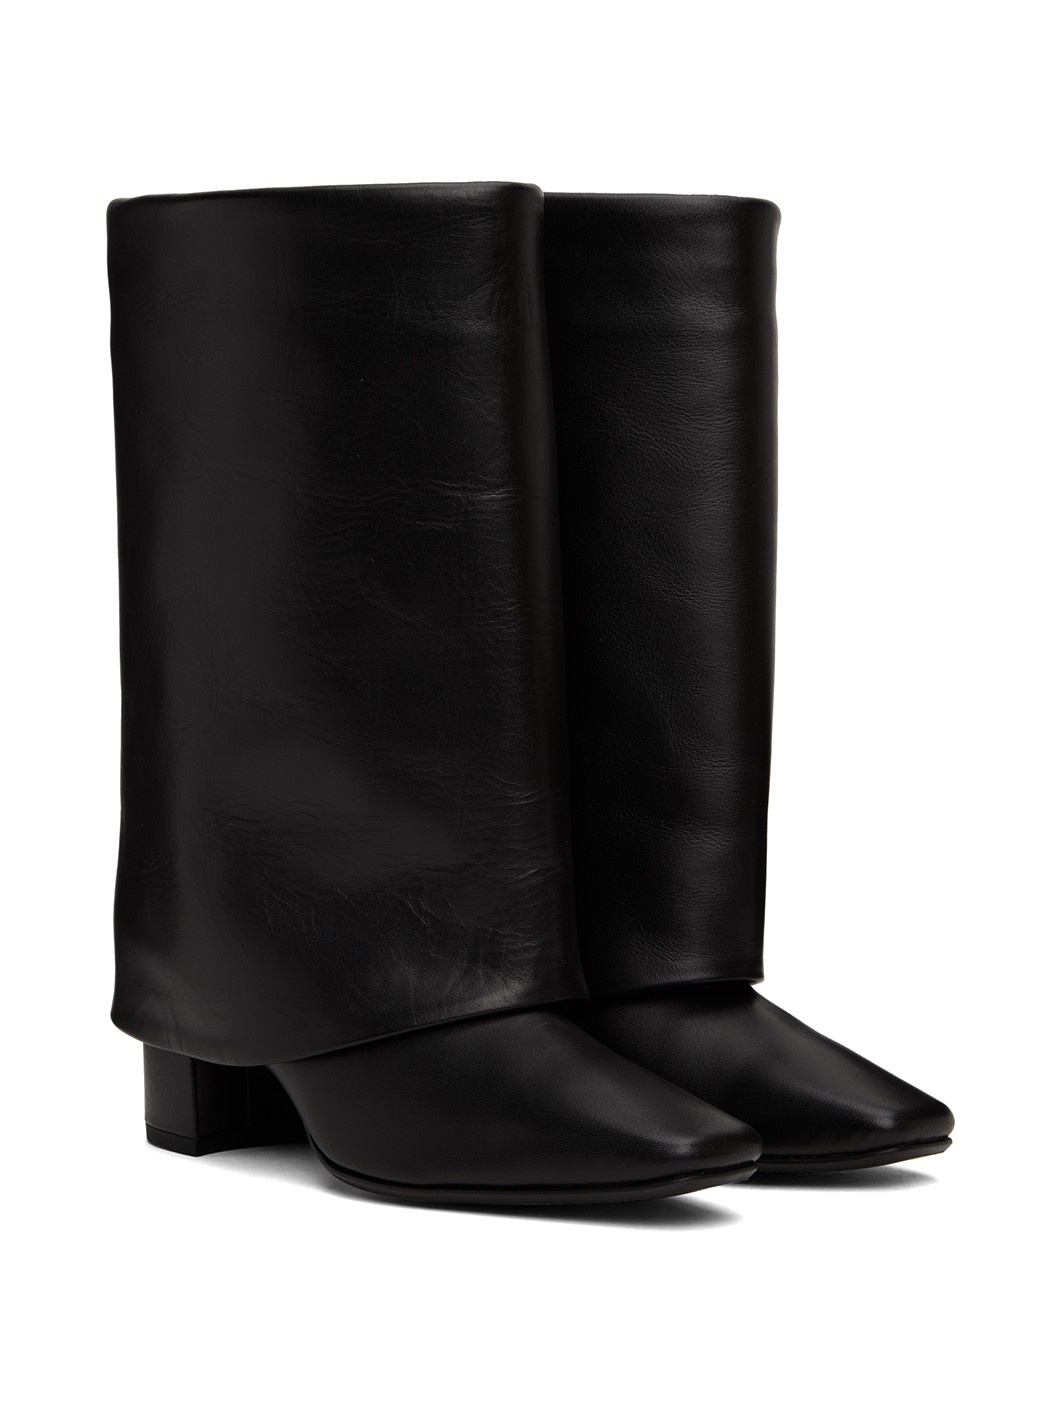 Black Cover Boots - 4